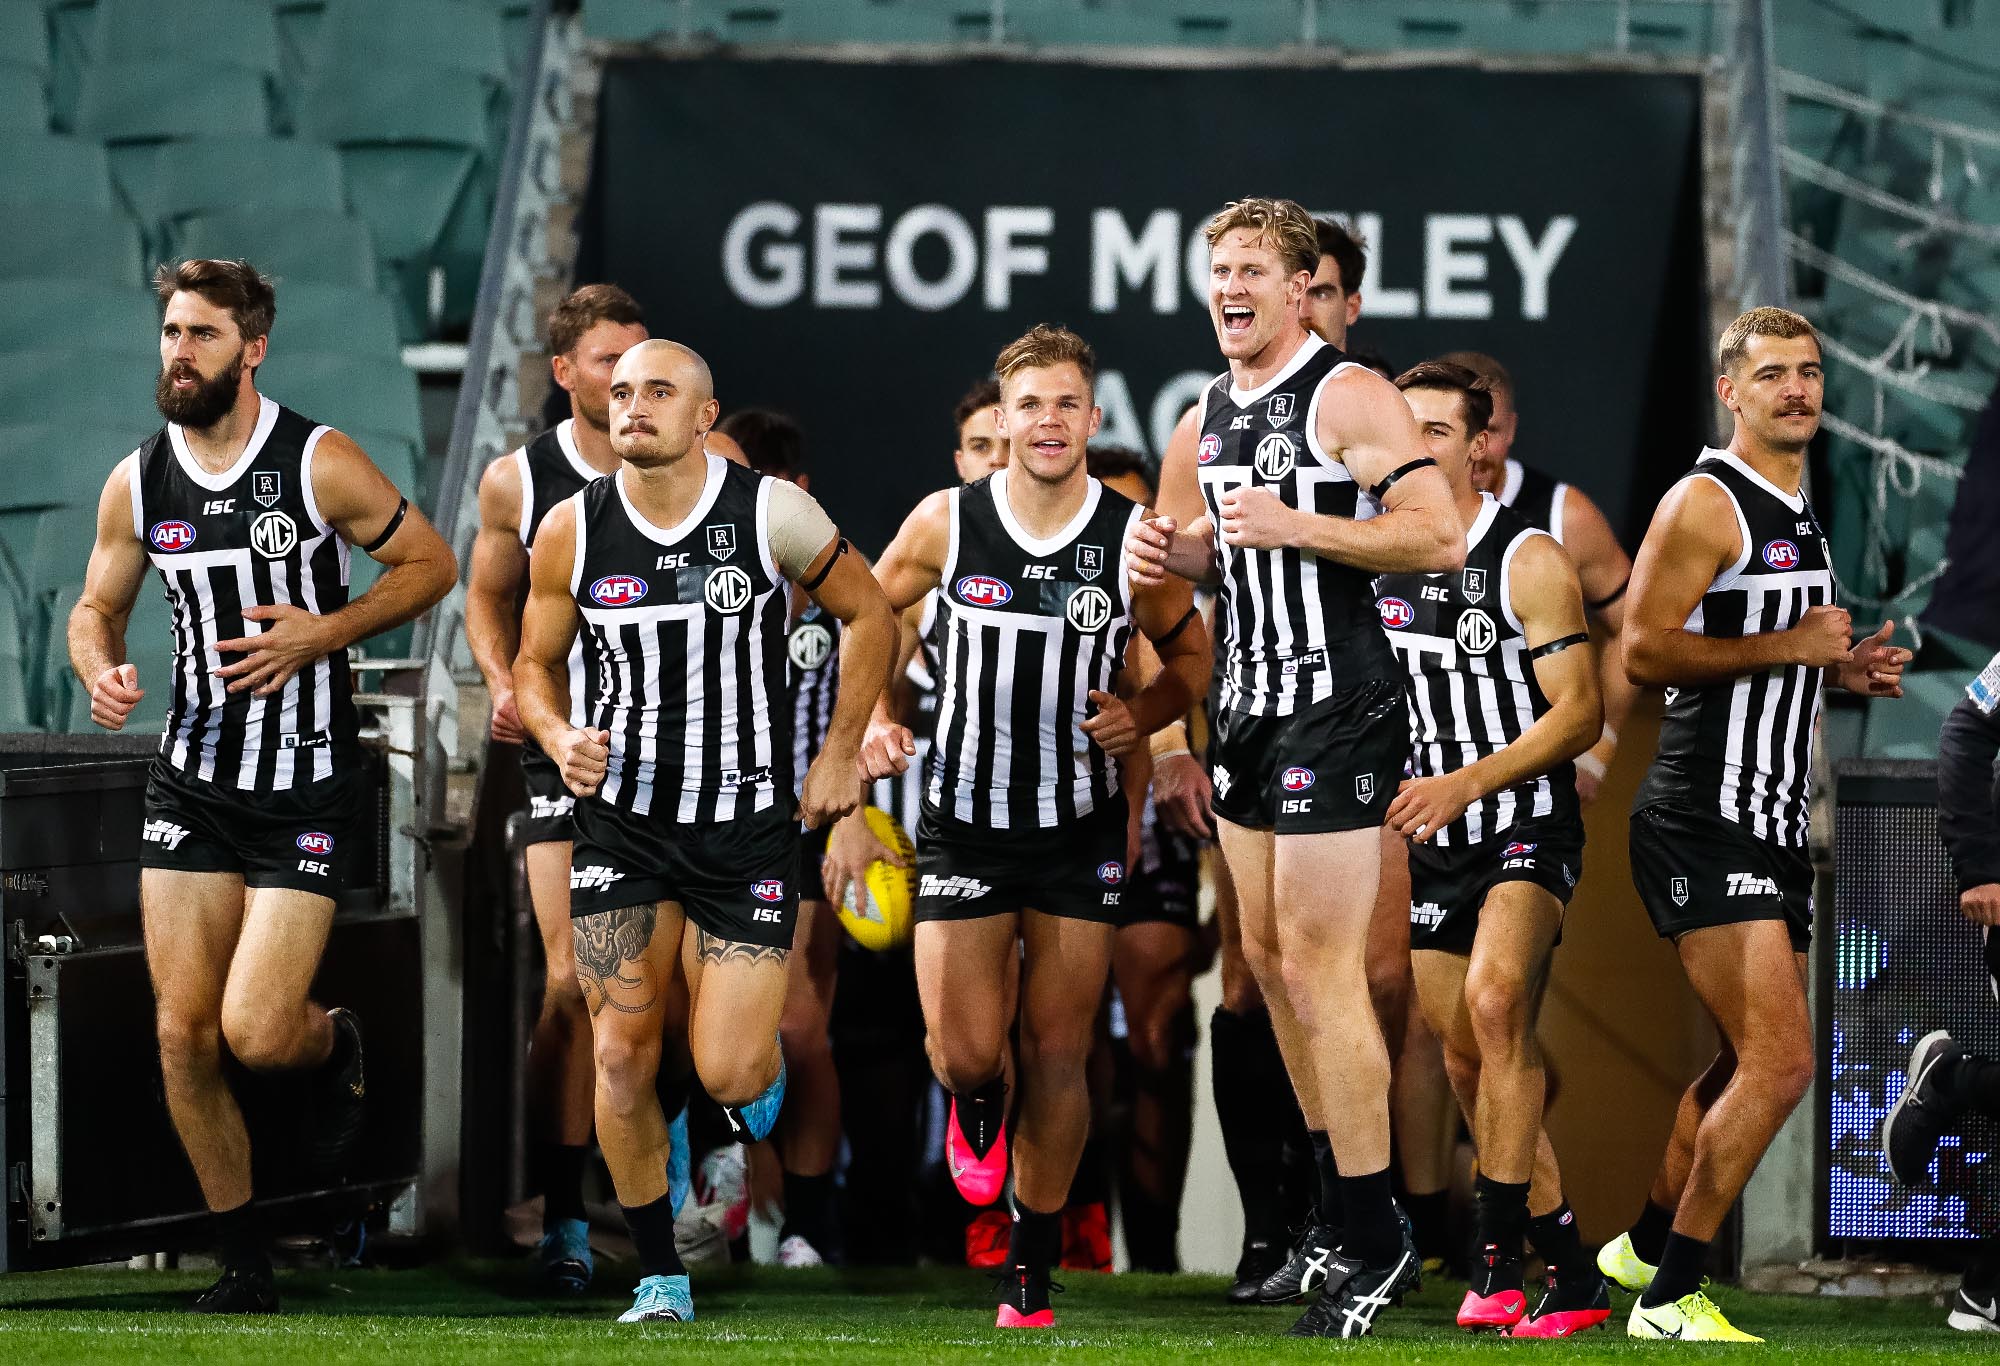 Port Adelaide run onto the field in their prison bar jersey